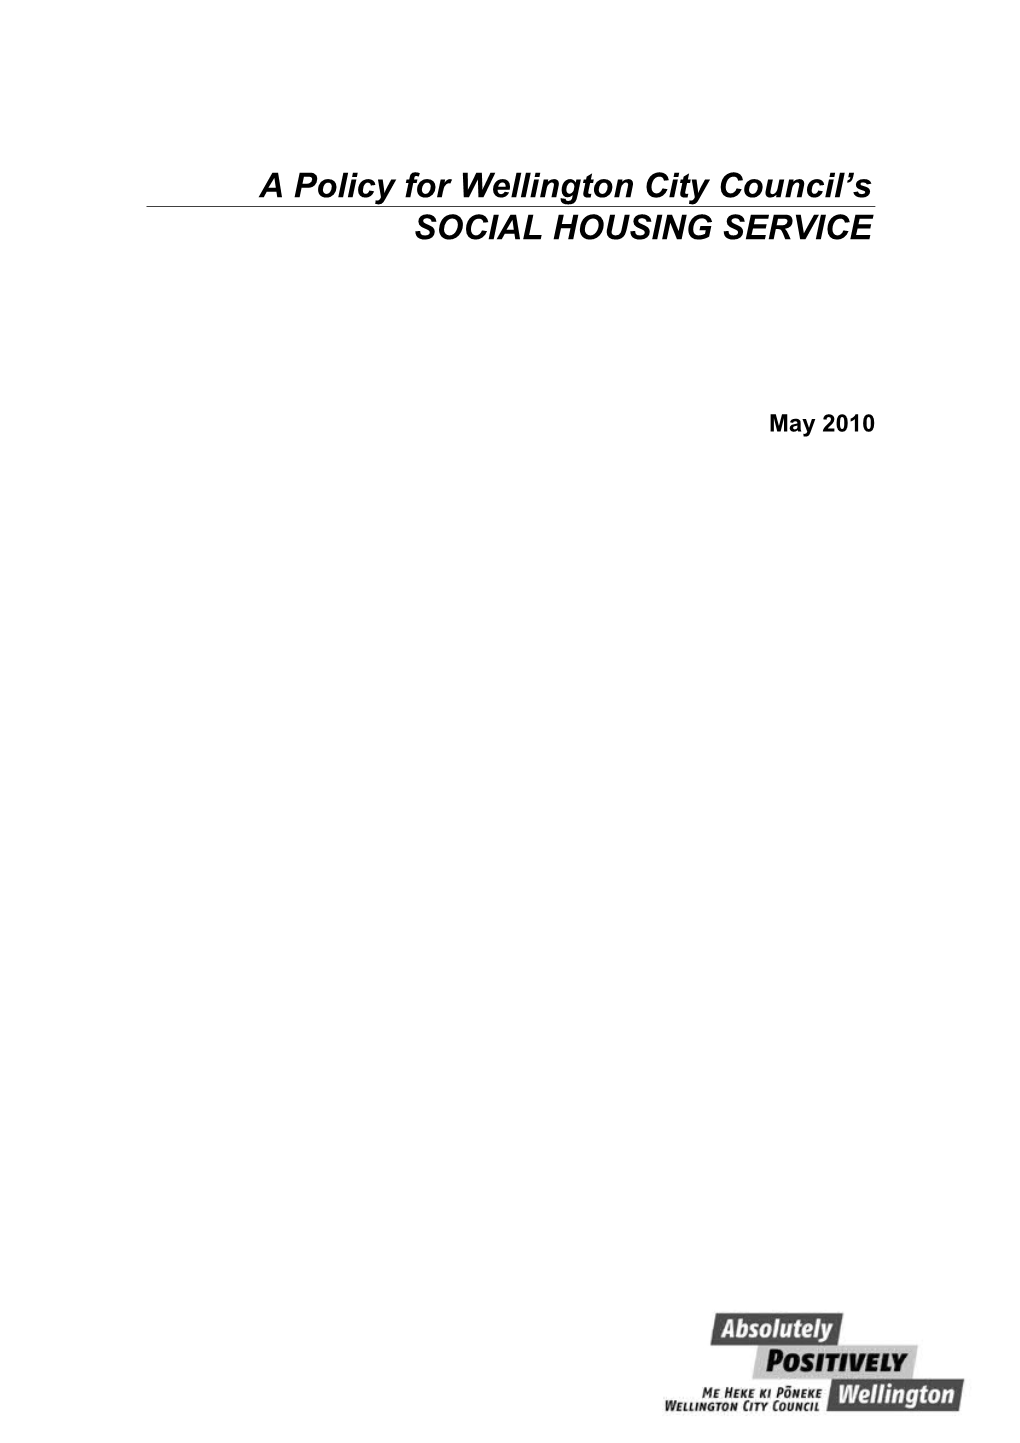 Housing - a Policy for Wellington City Council's Social Housing Service (May 2010)